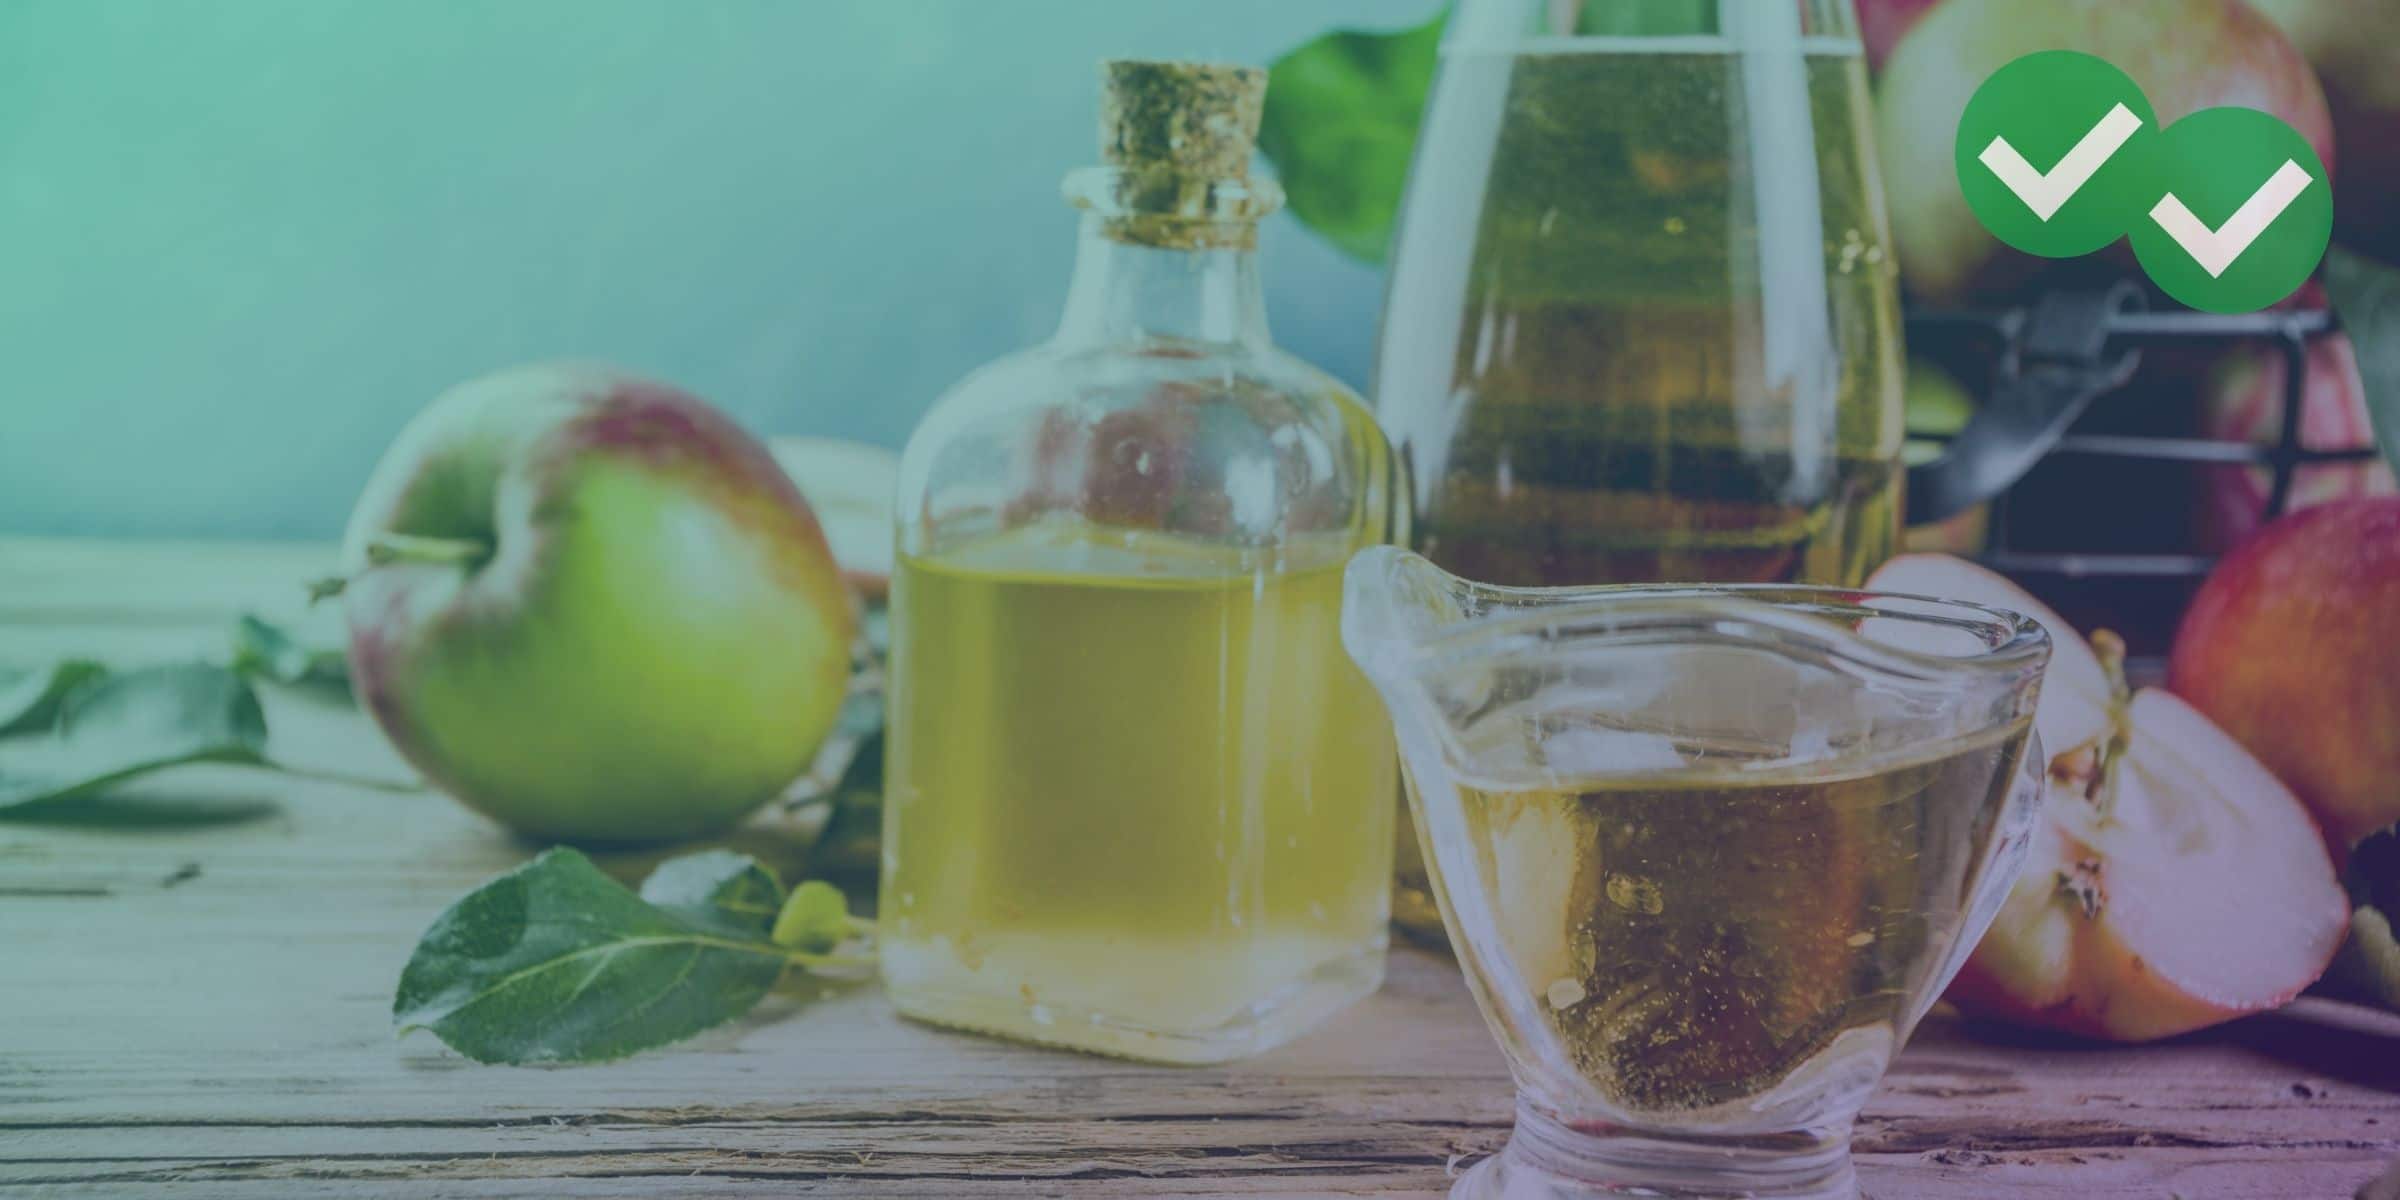 Apple and vinegar representing MCAT enzymes - image by Magoosh